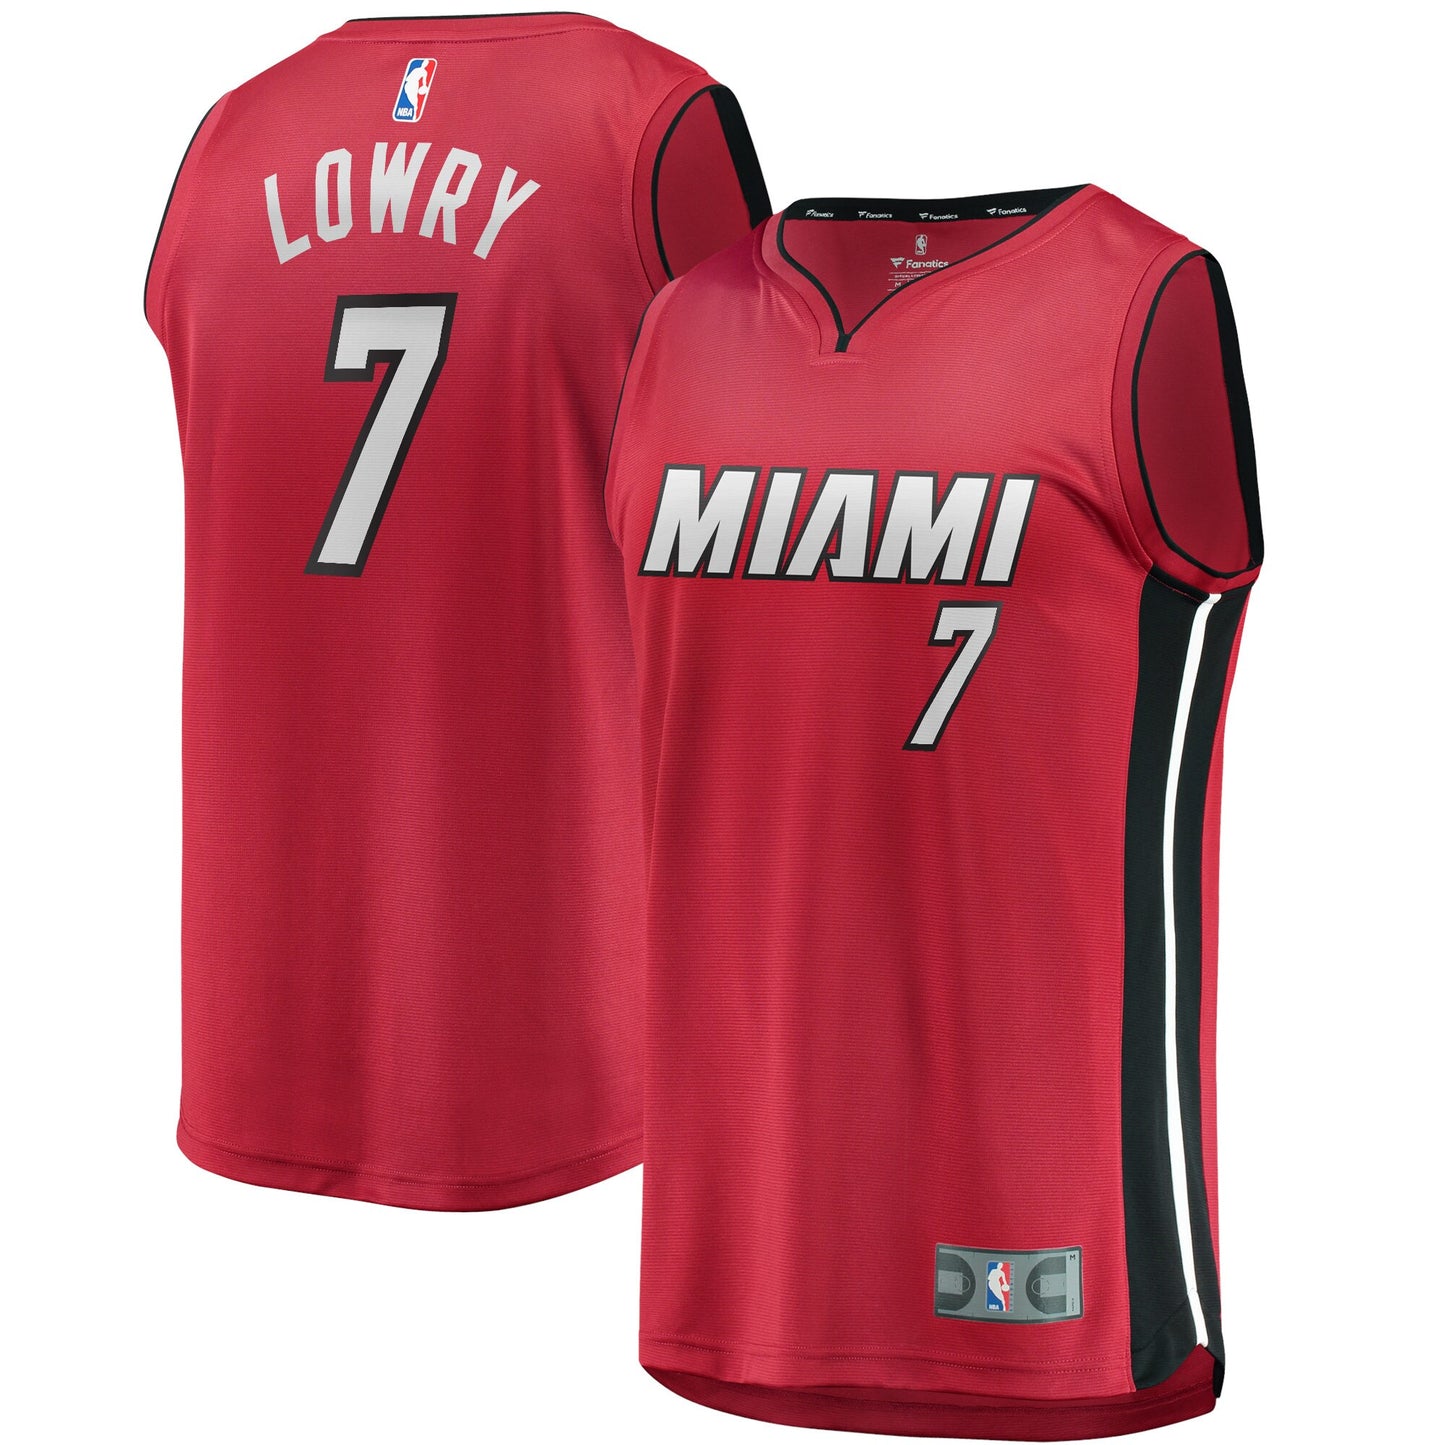 Kyle Lowry Miami Heat Fanatics Branded Youth 2021/22 Fast Break Replica Player Jersey Red - Statement Edition